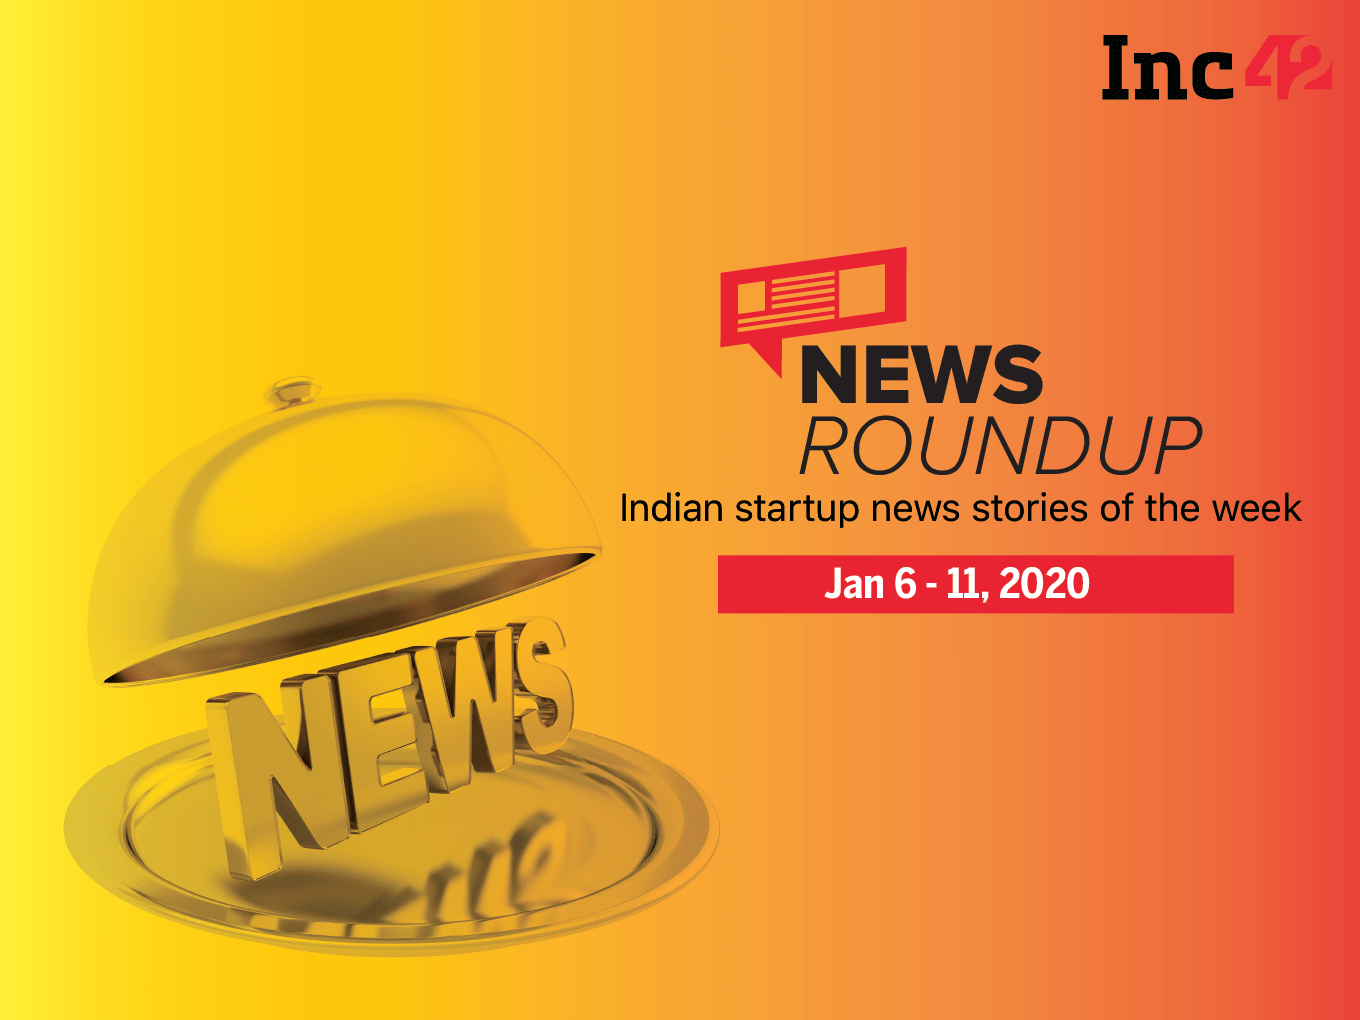 News Roundup: 11 Indian Startup News Stories You Don’t Want To Miss This Week [Jan 06 - 11]